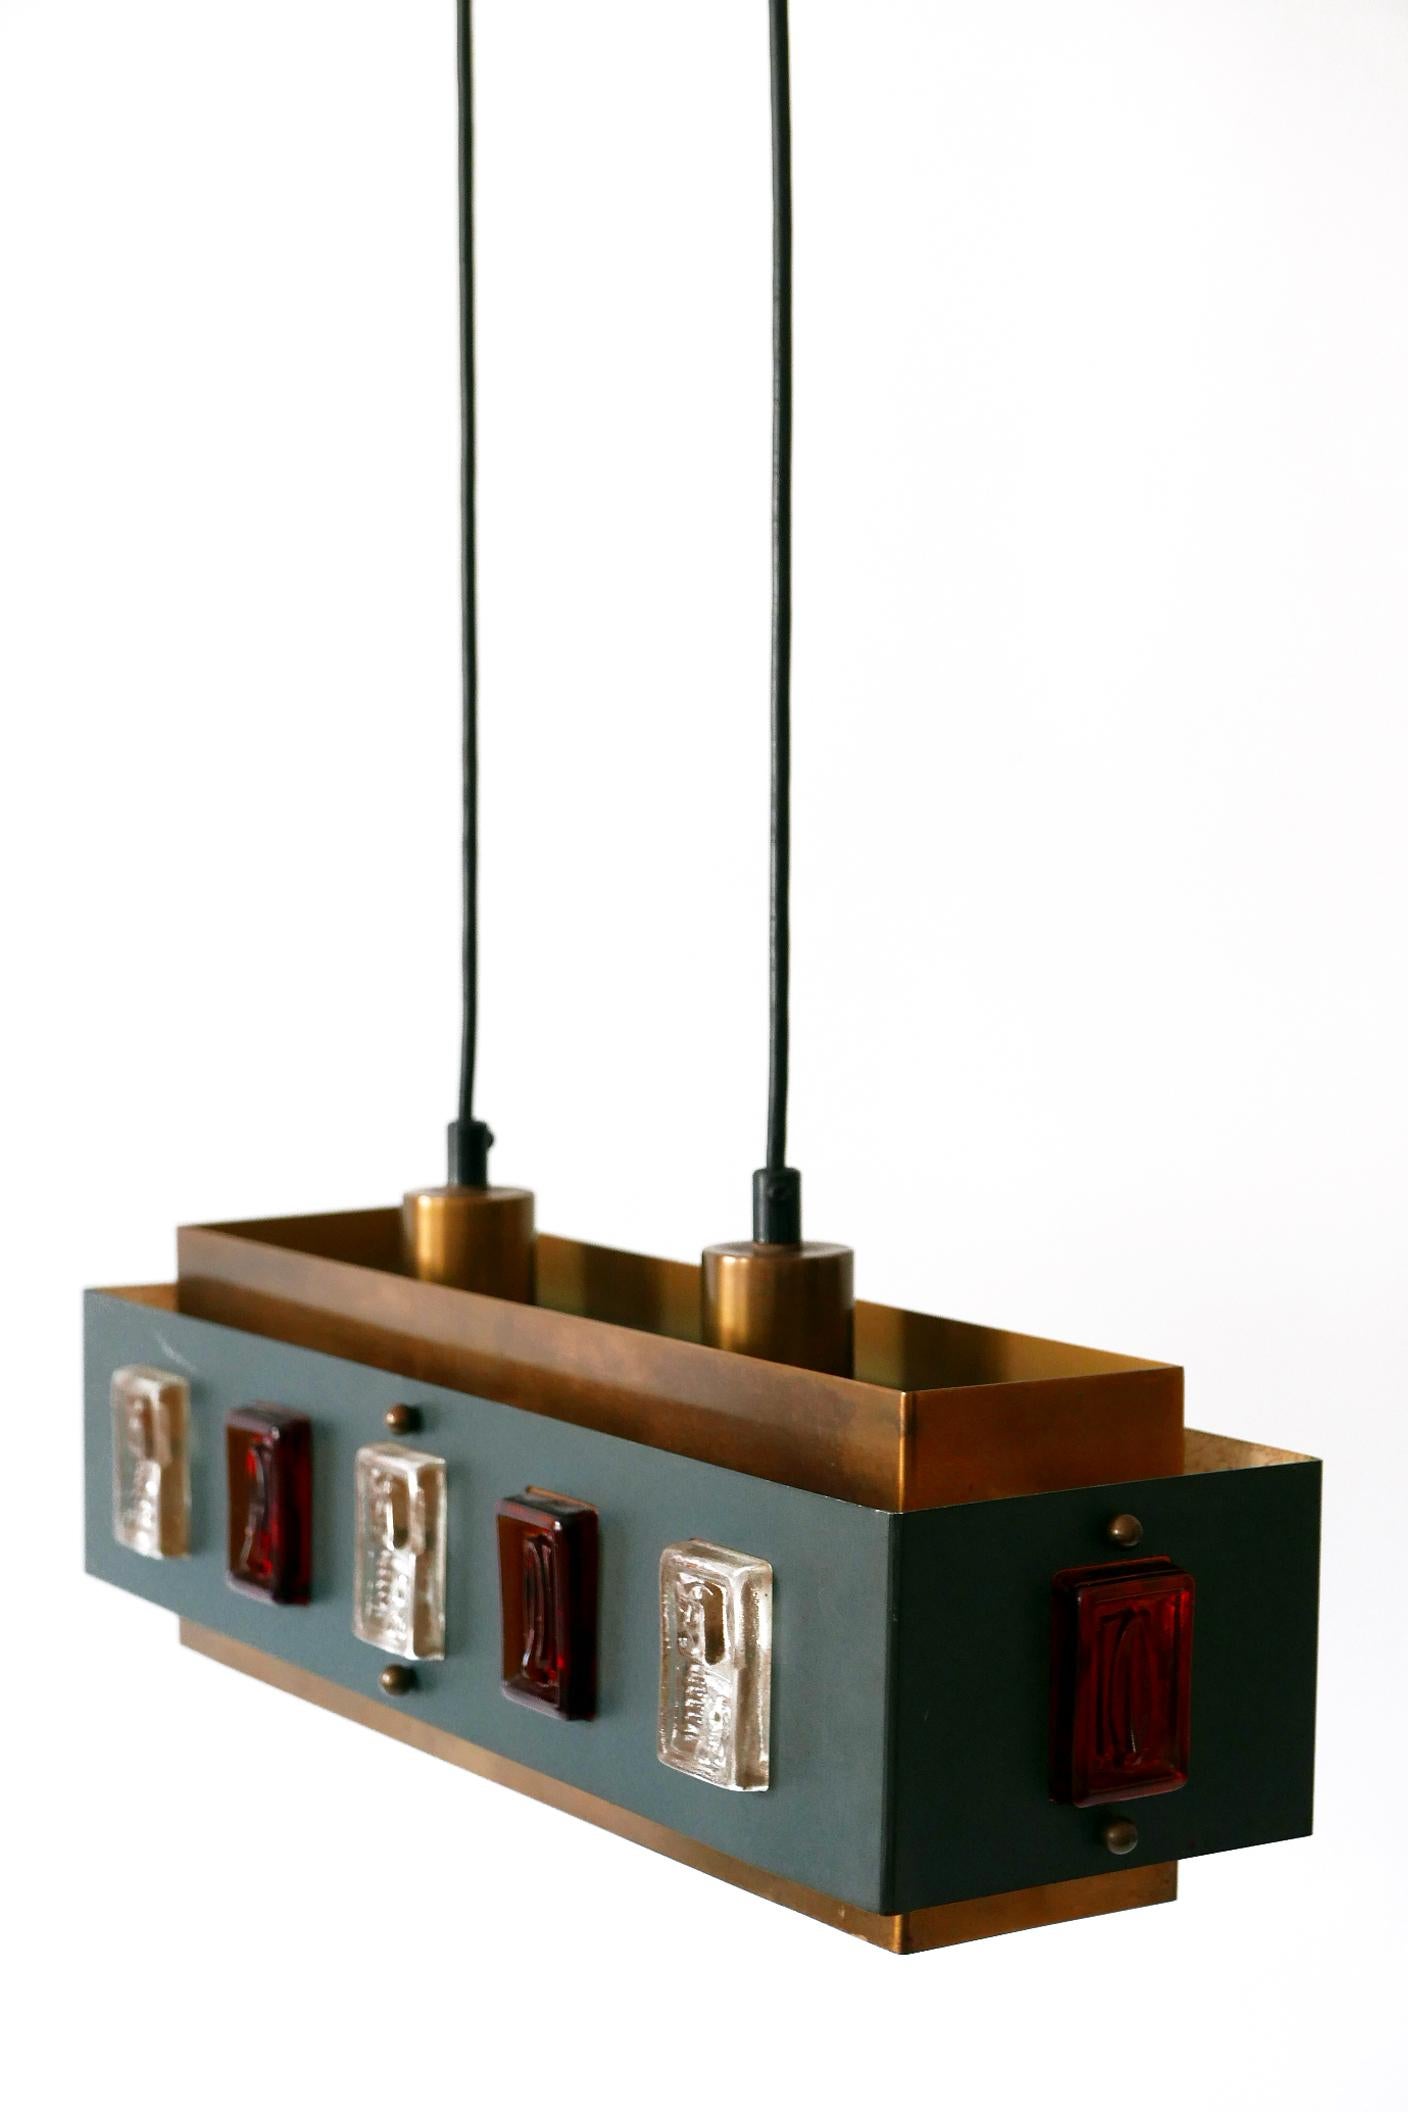 Amazing Mid-Century Modern pendant lamp or hanging light. Designed by Einar Backström and Erik Höglund for Boda Glasbruk, Sweden, 1960s.

Executed in enameled steel, brass, glass and enameled aluminum, it comes with 2 x E27 / E26 Edison screw fit